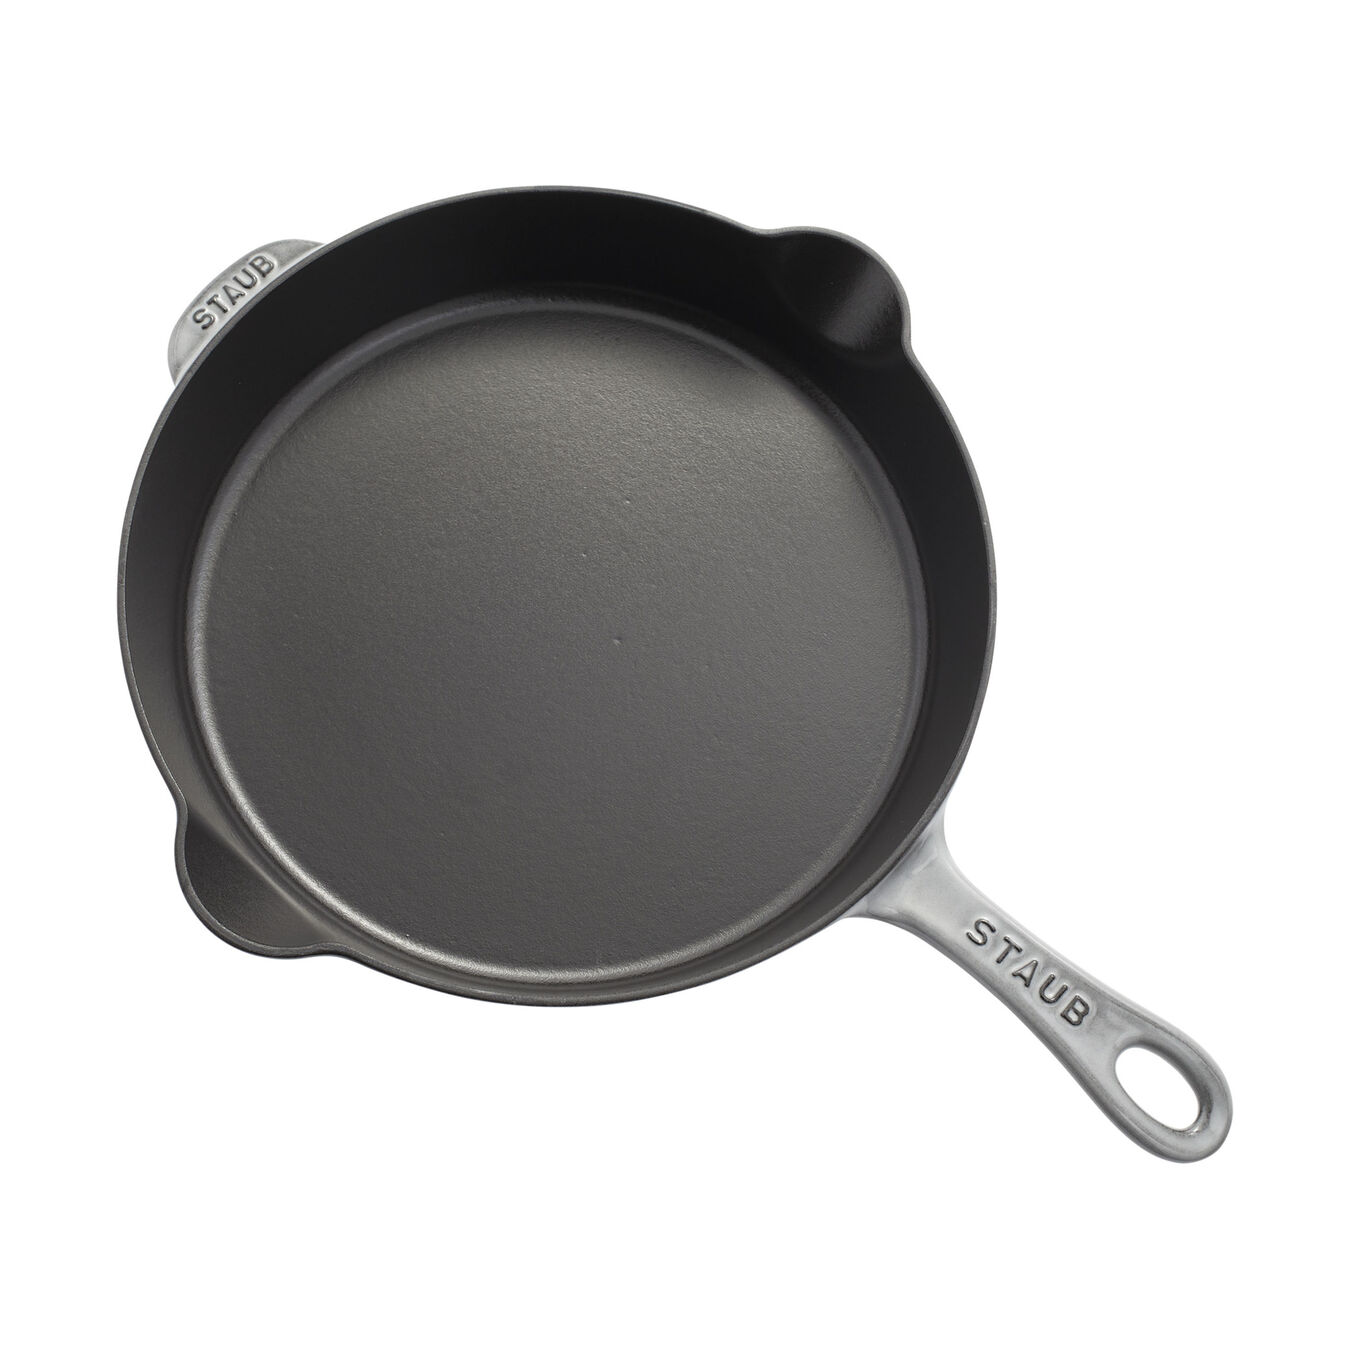 28 cm / 11 inch cast iron Traditional Deep Frypan, graphite-grey,,large 3